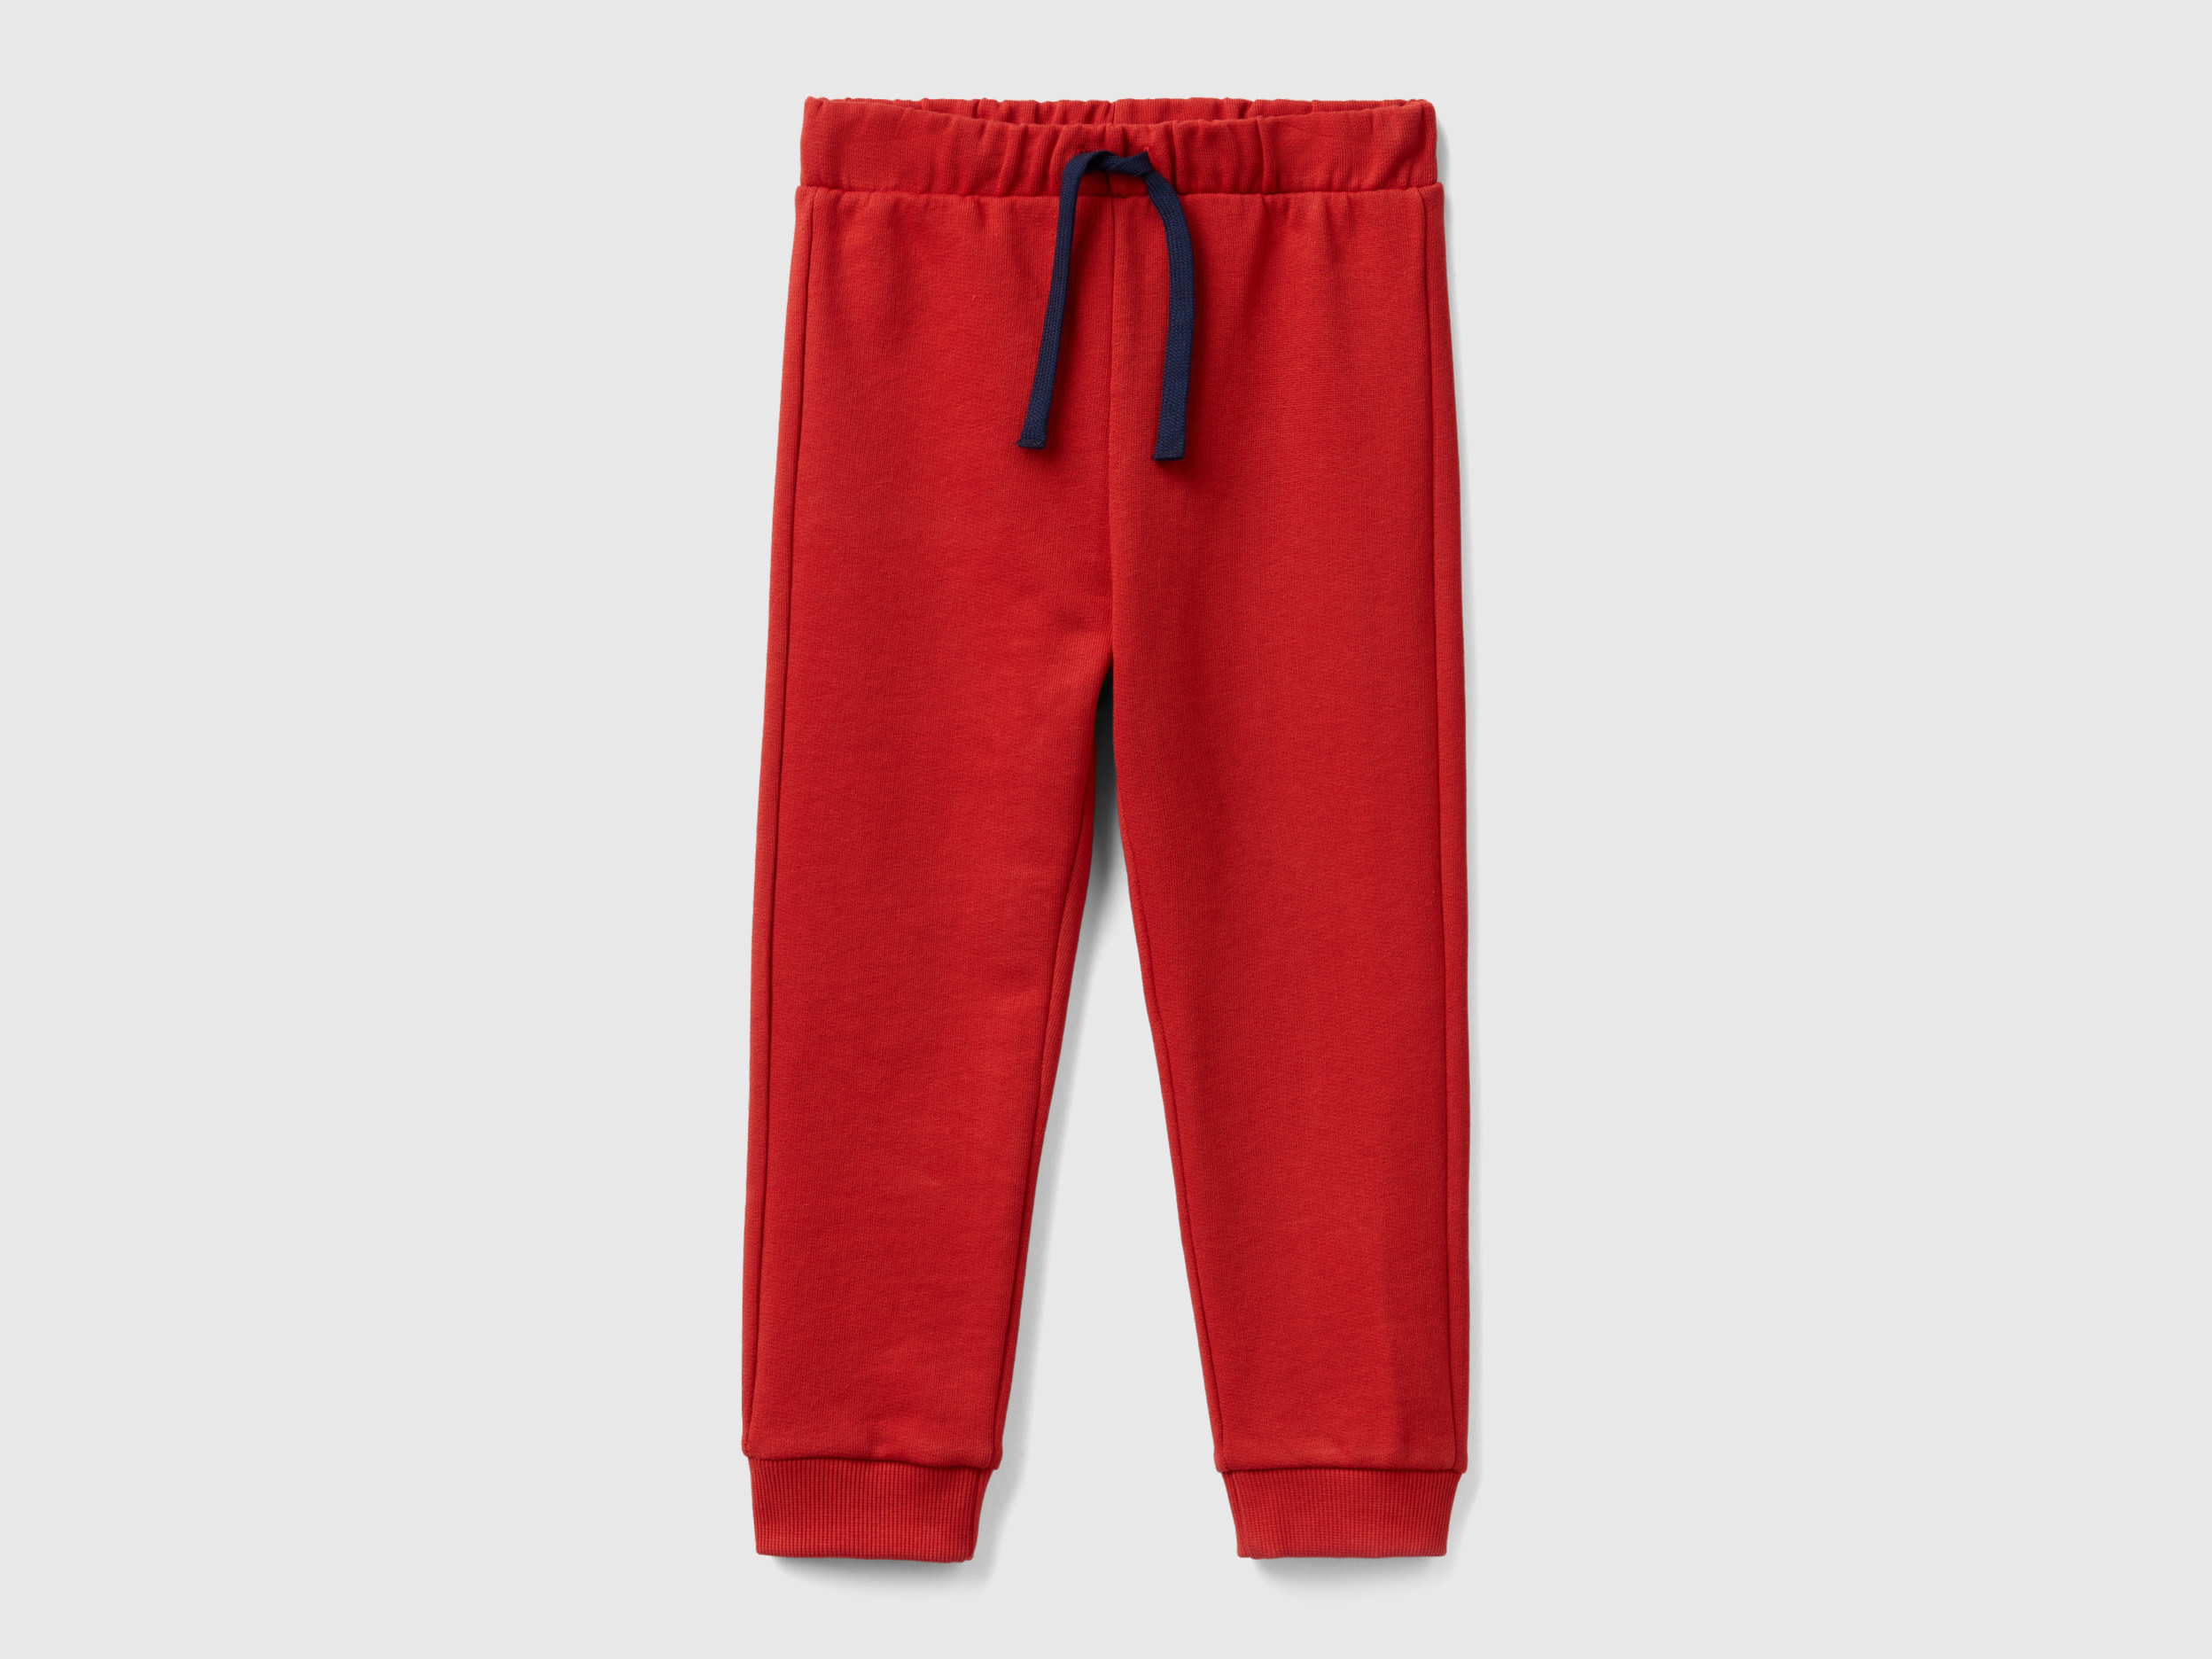 Image of Benetton, Sweatpants With Pocket, size 104, Brick Red, Kids